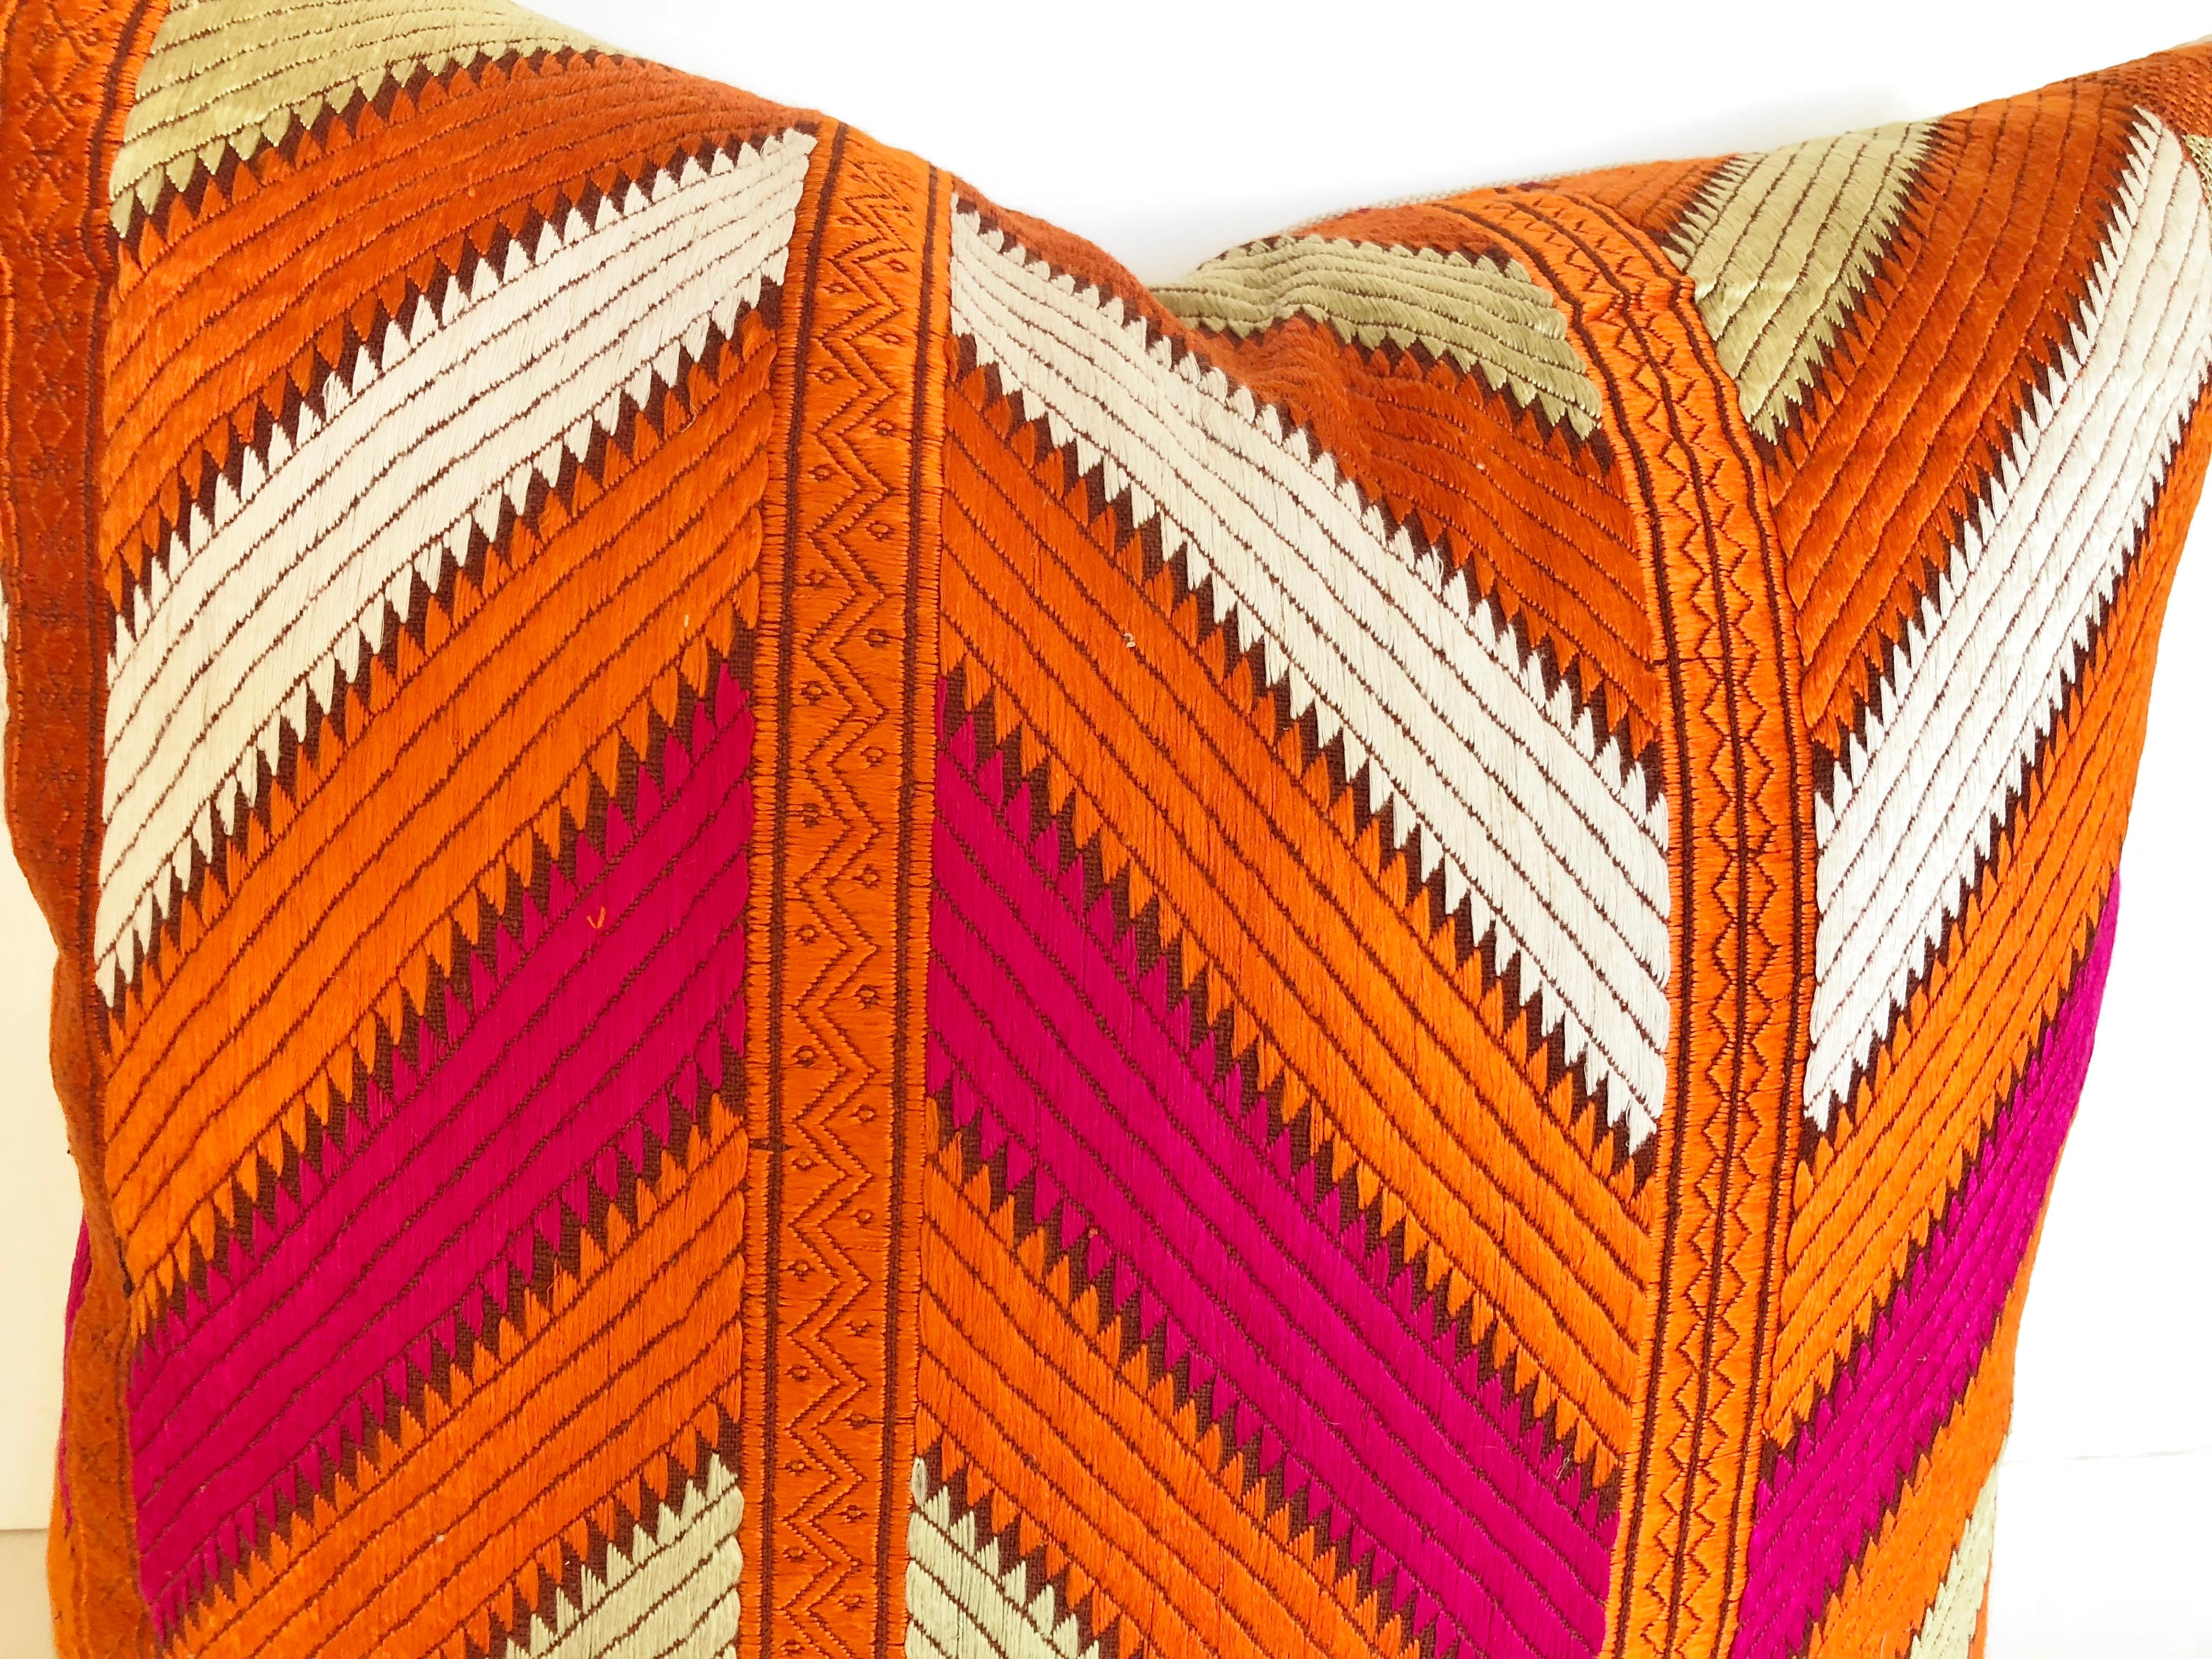 Embroidered Custom Pillows by Maison Suzanne Cut from a Vintage Phulkari Bagh Wedding Shawl